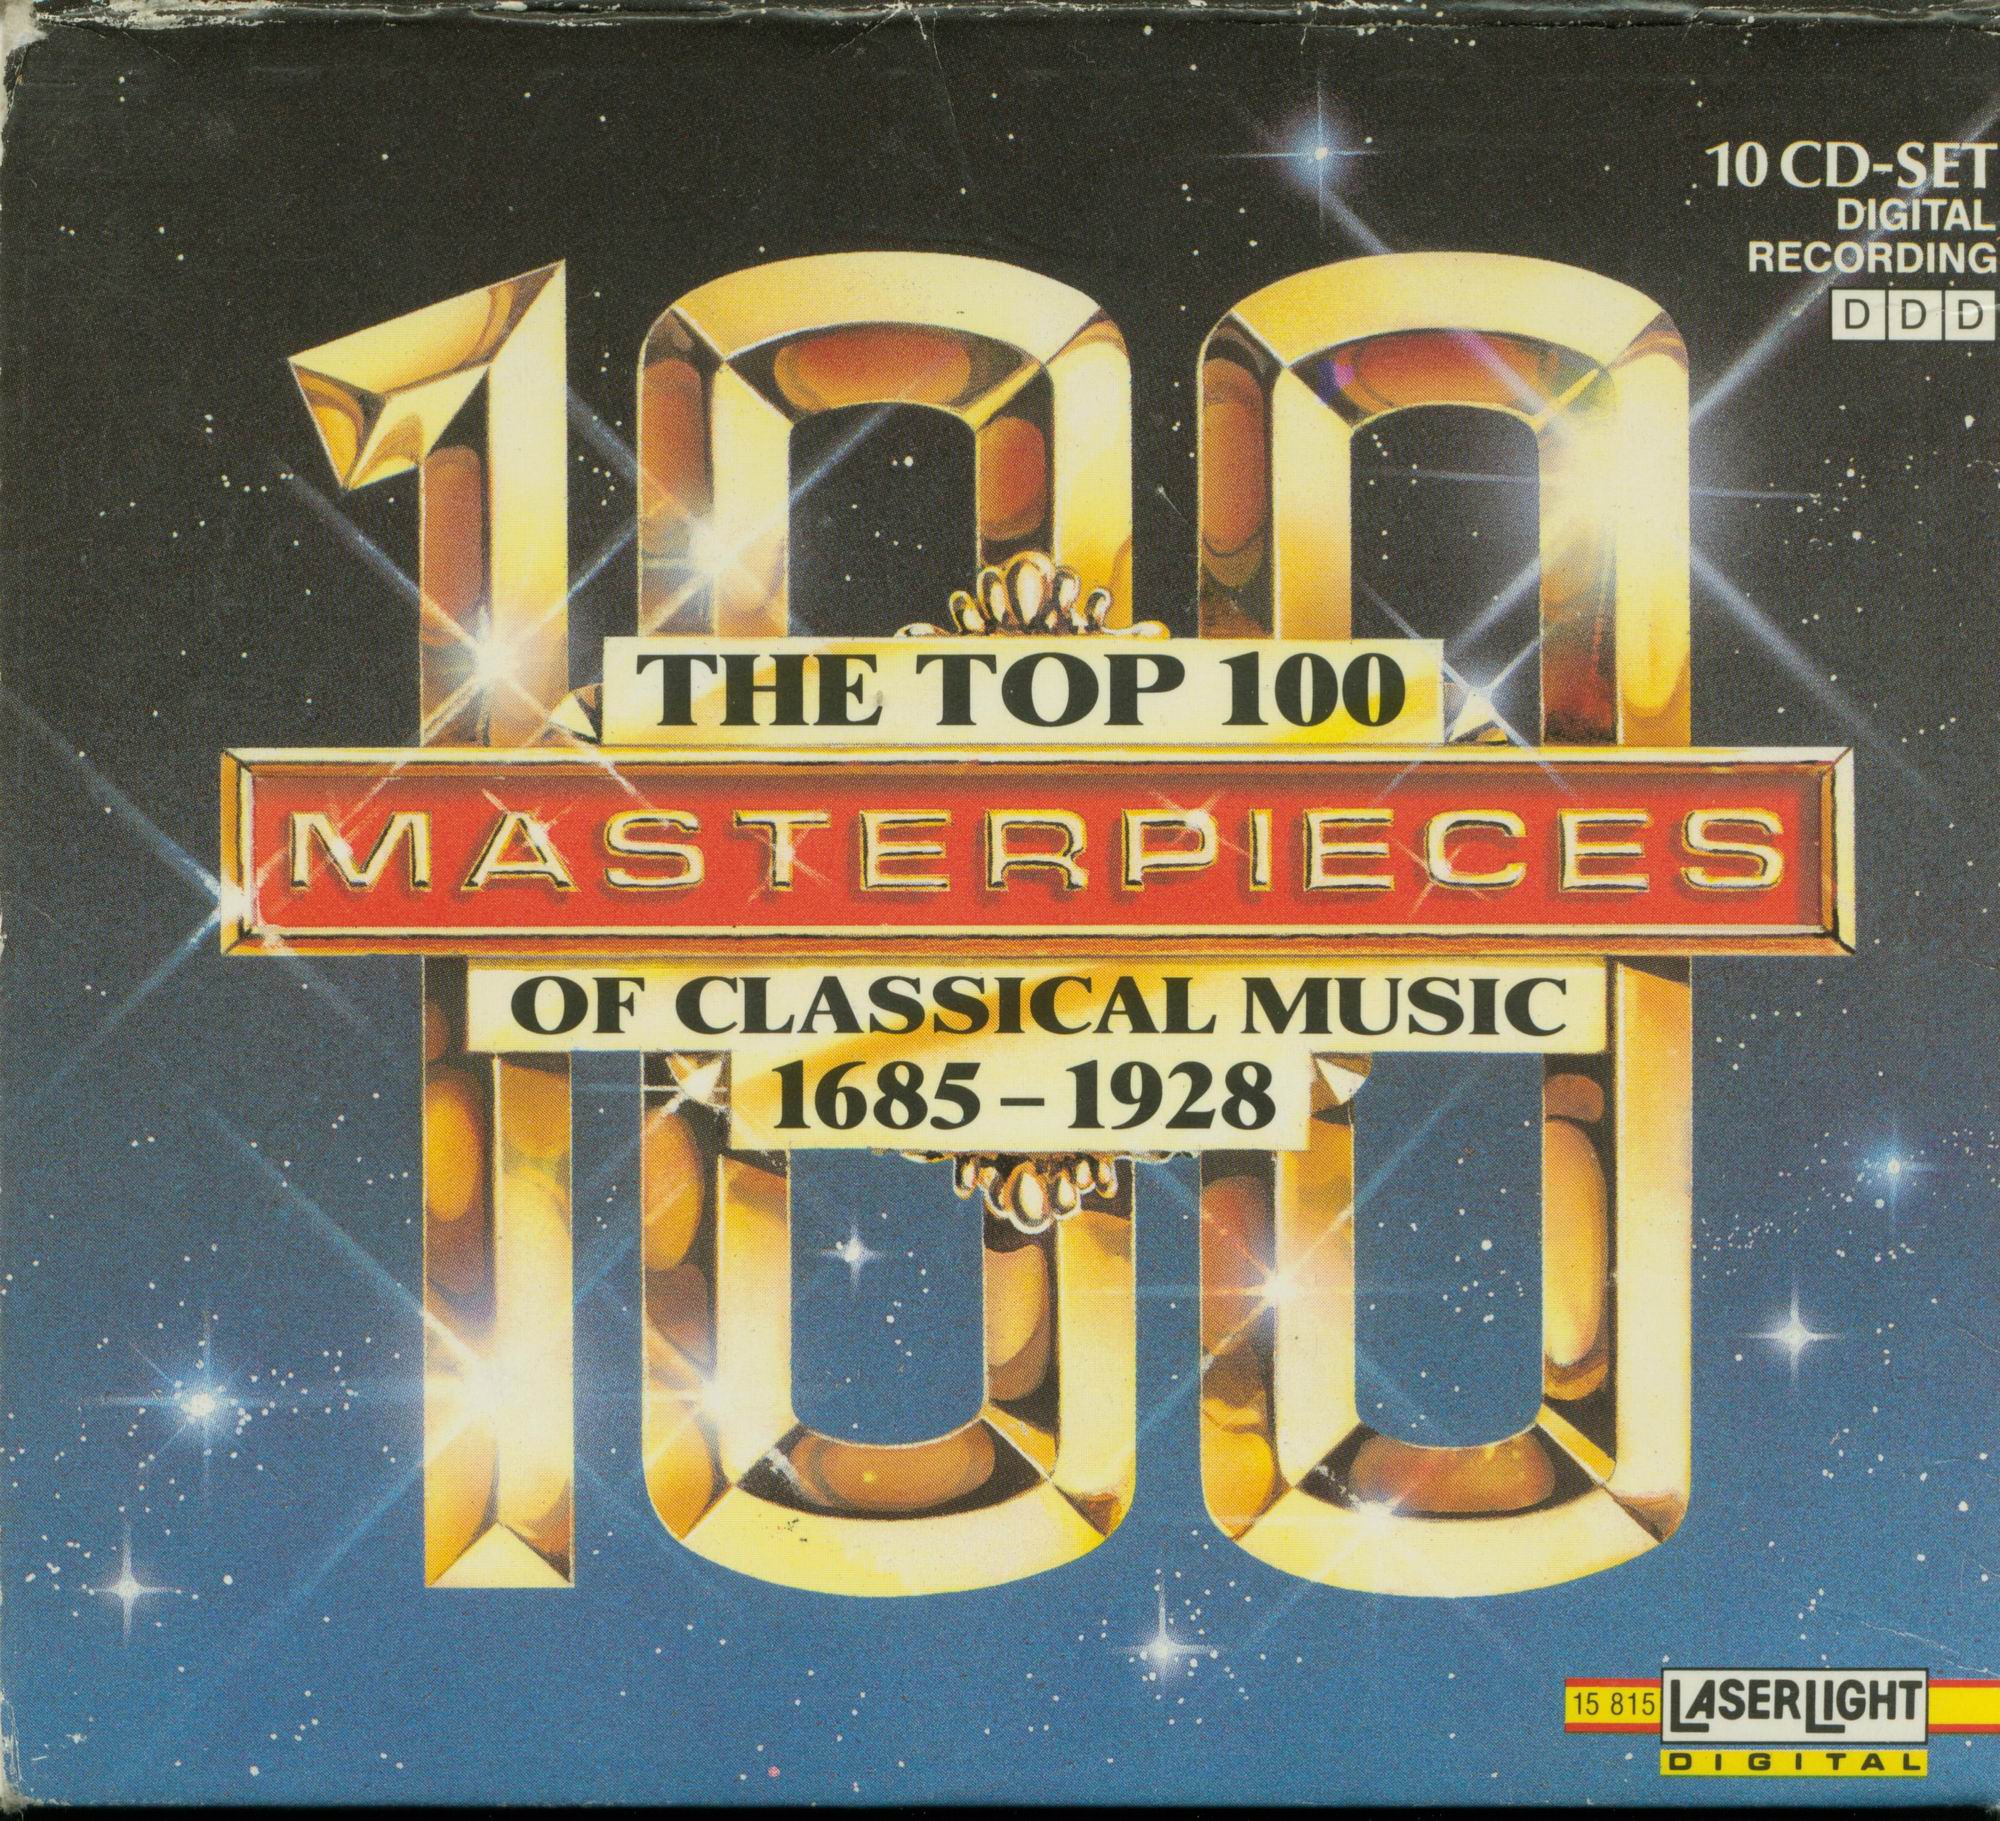 100 Masterpieces of Classical Music 1685-1730